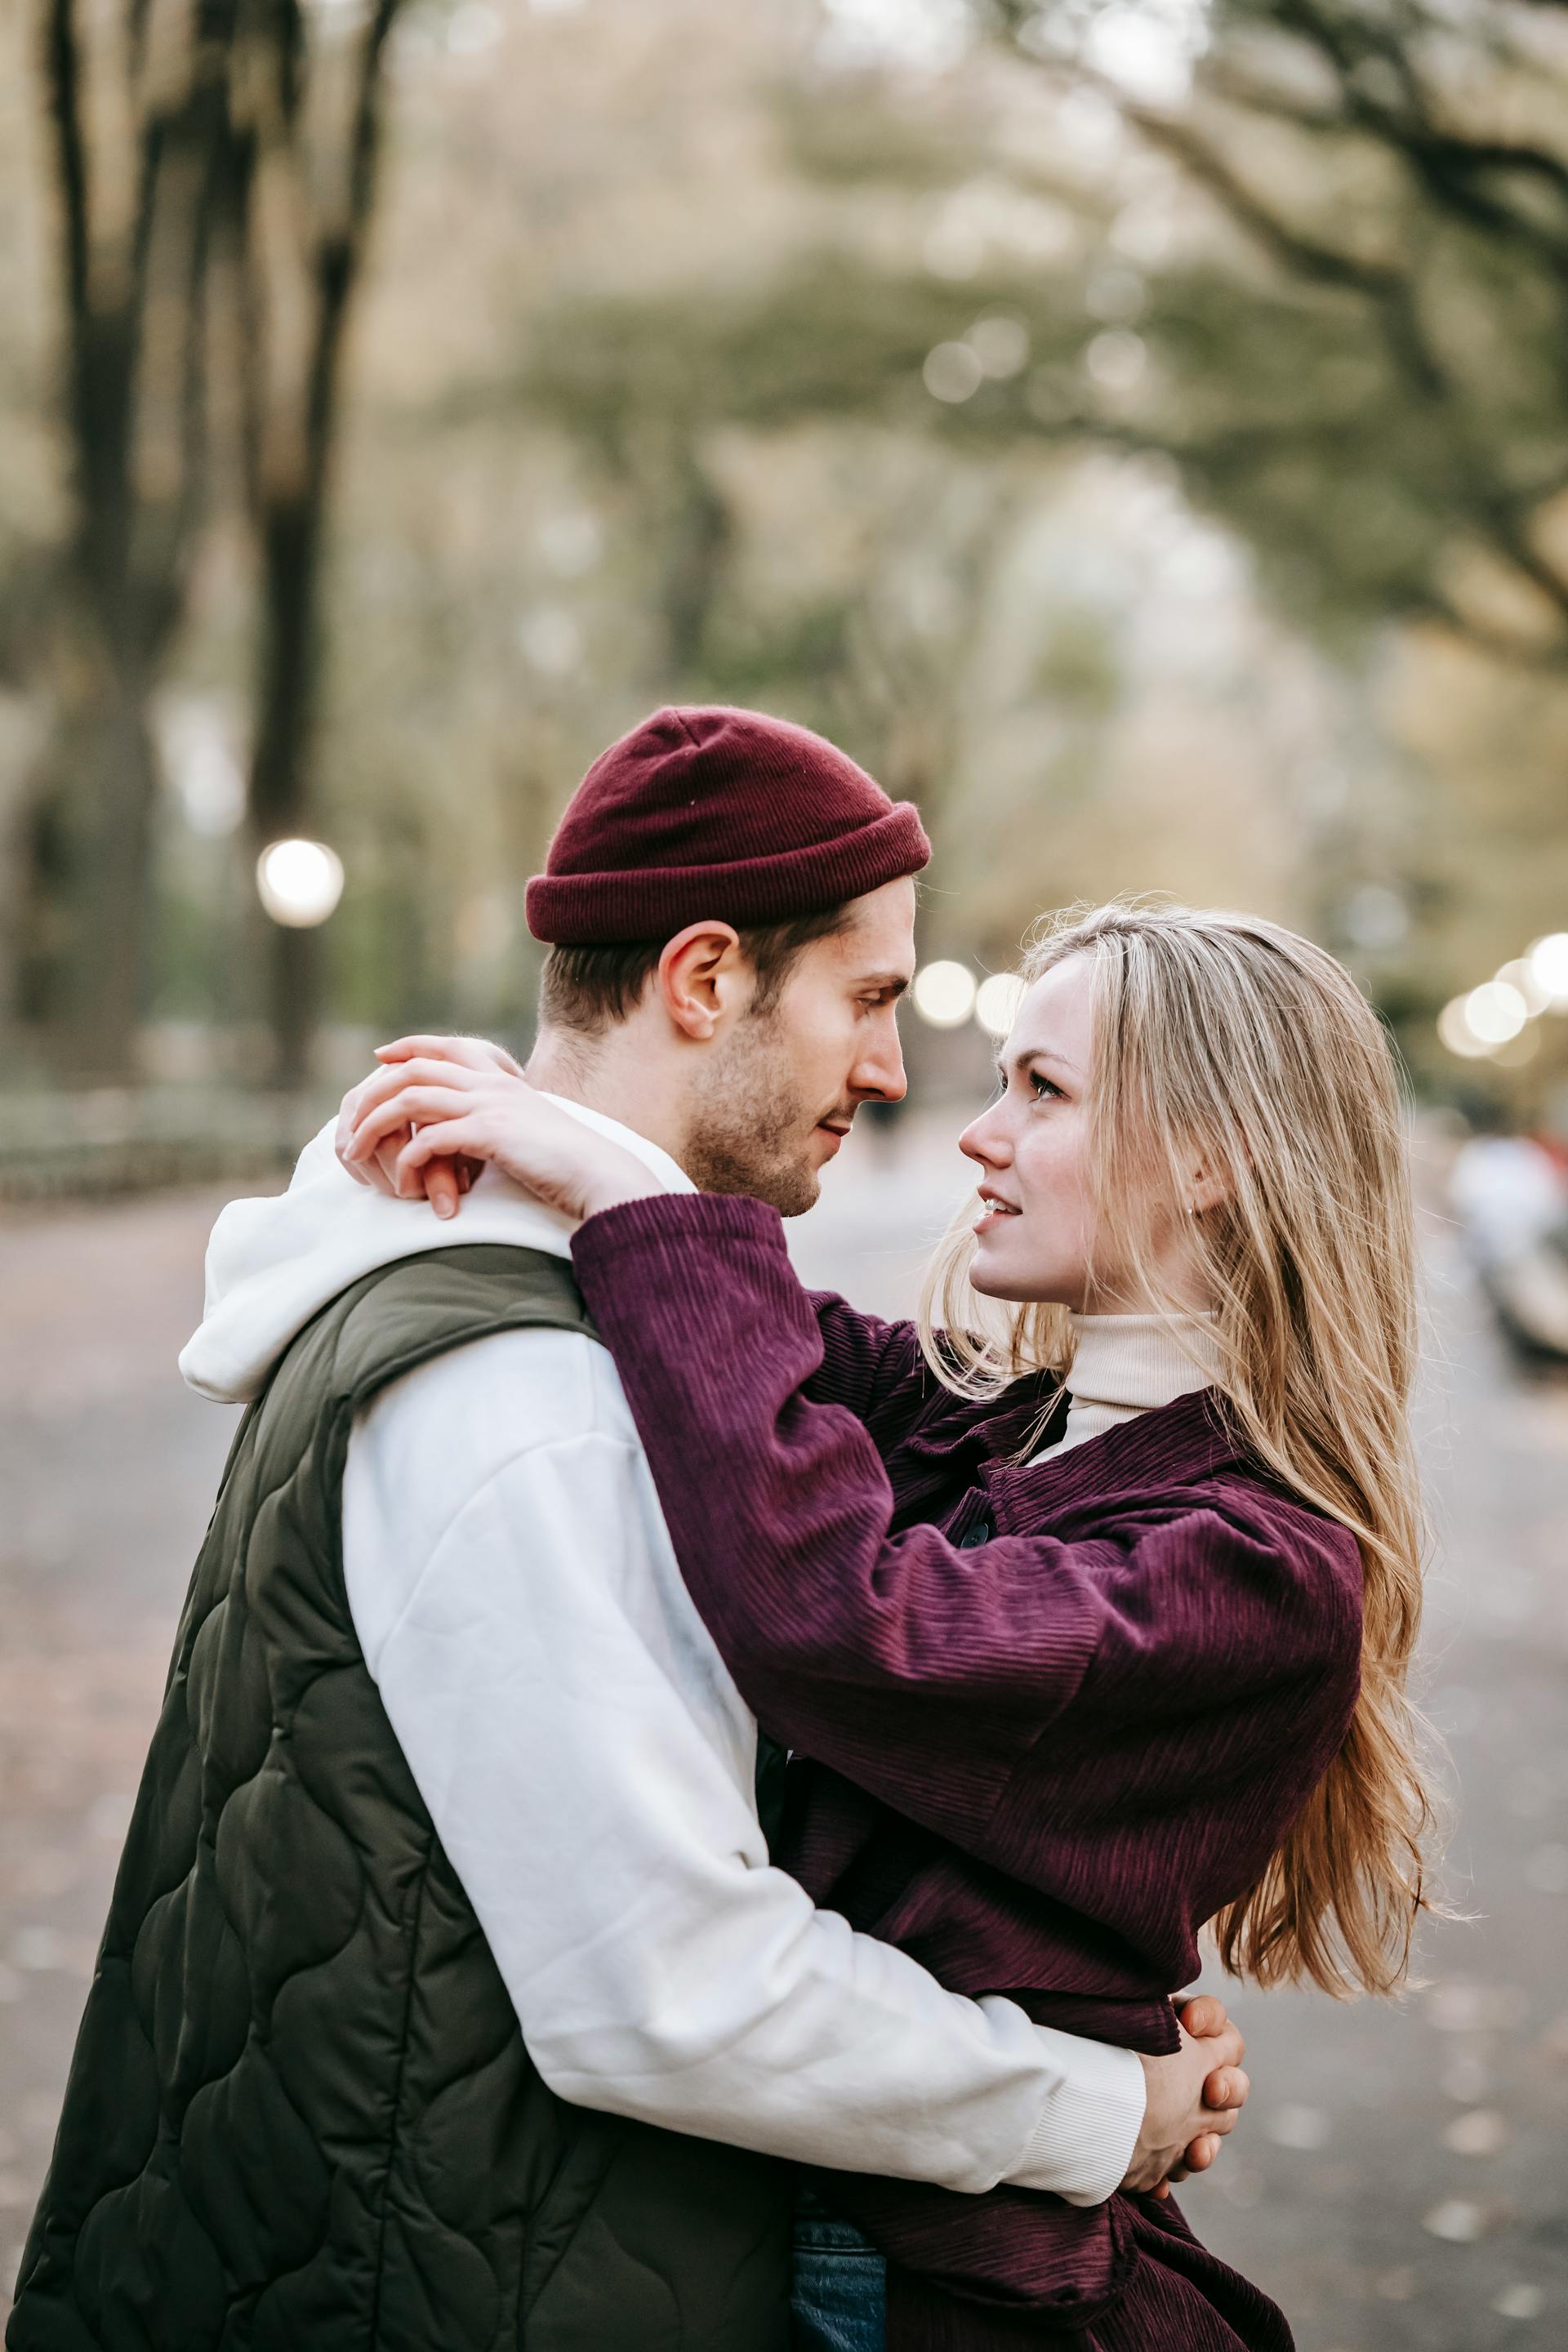 A couple looking into each other's eyes while hugging | Source: Pexels